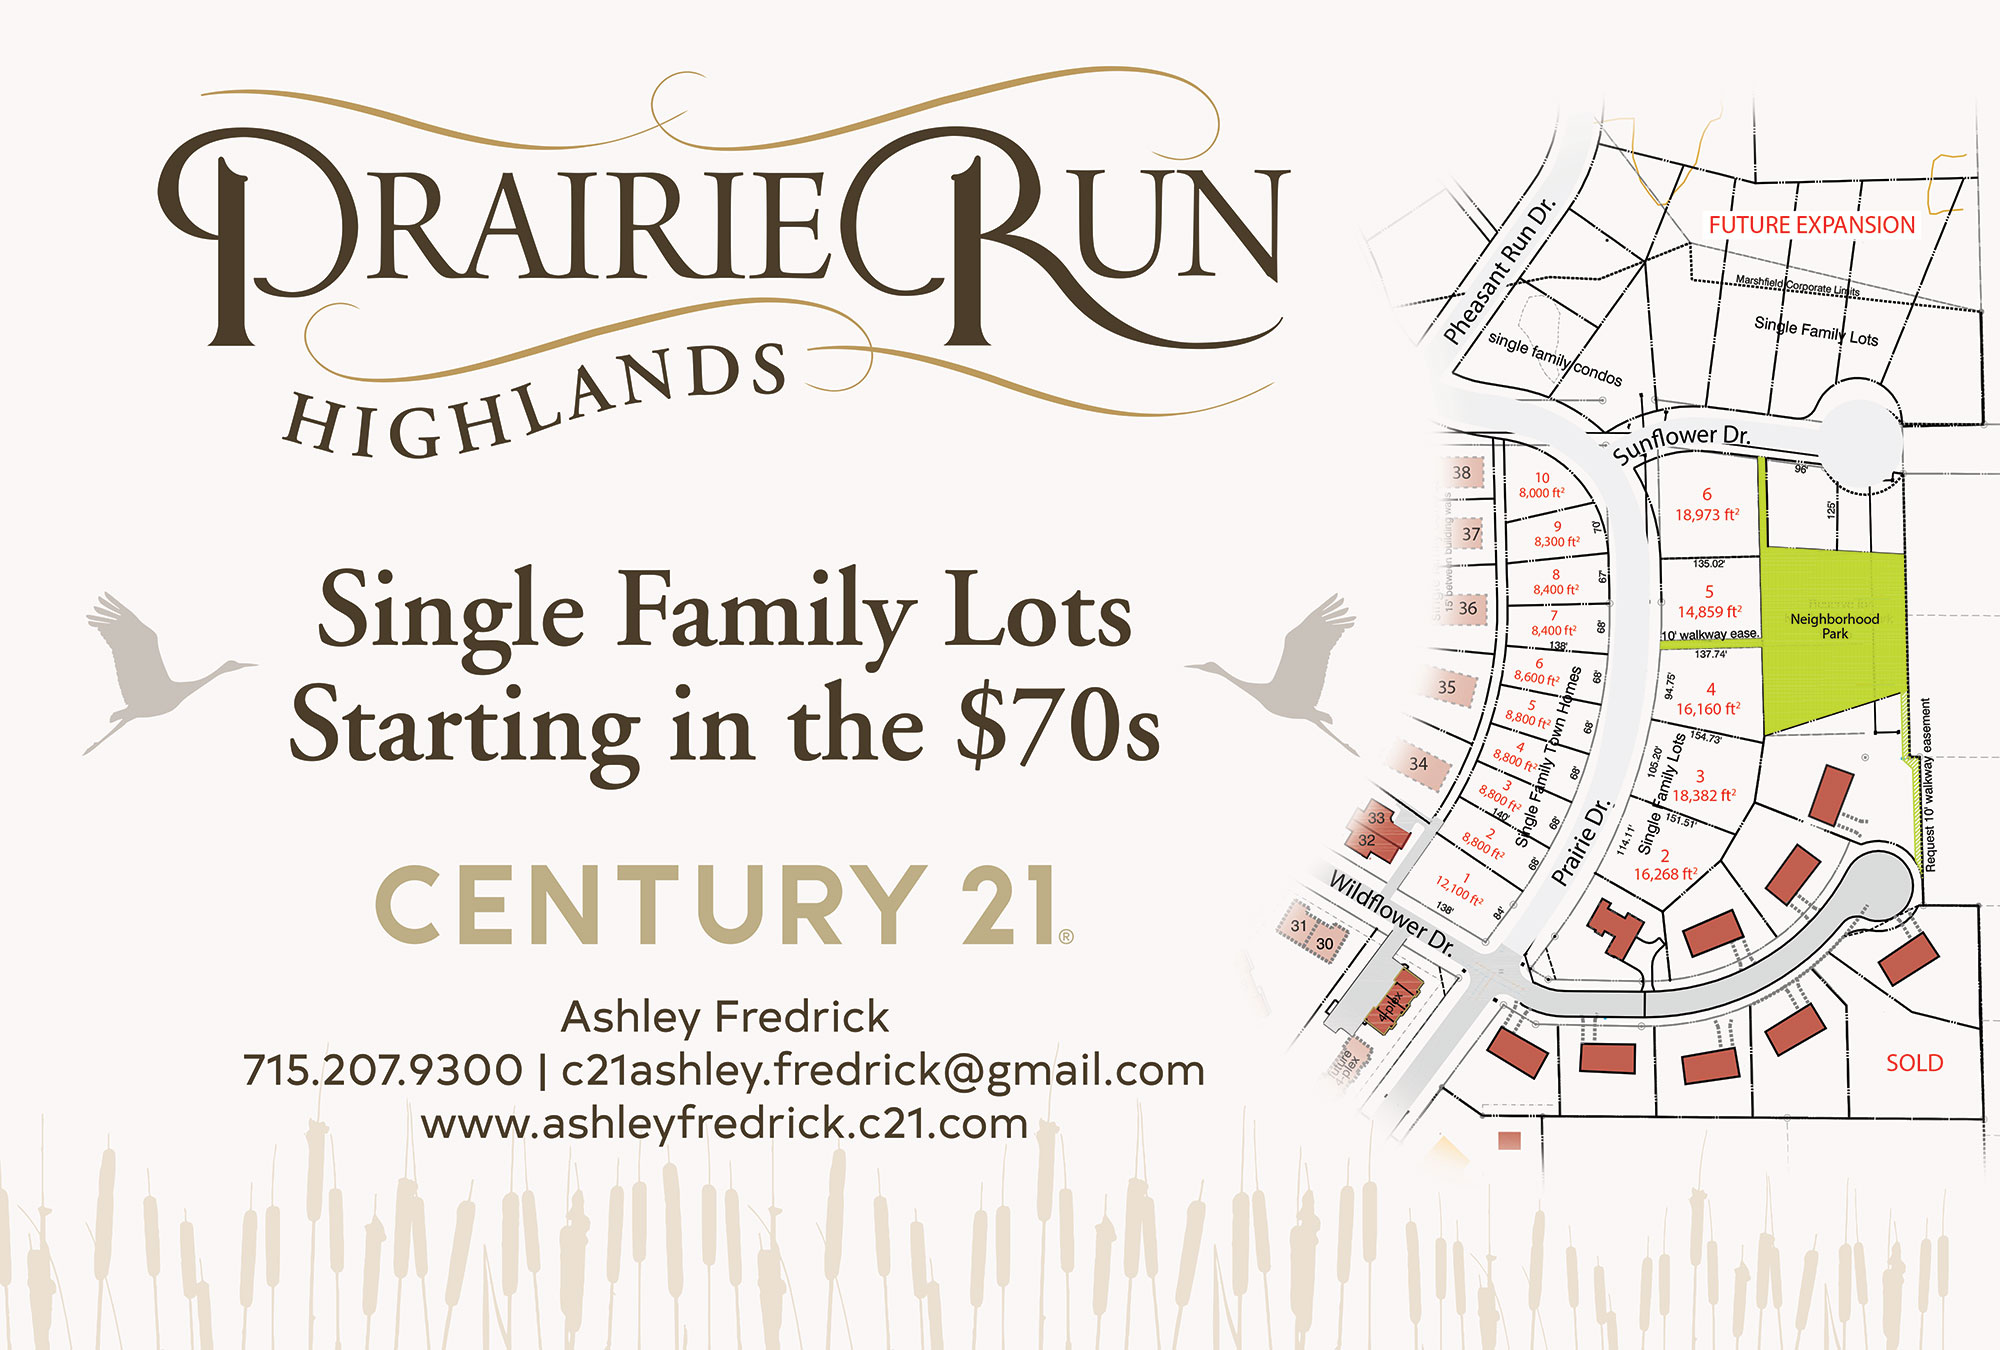 Prairie Run Highlands existing infrastructure and lot map. Single family lots starting in the $70,000’s.